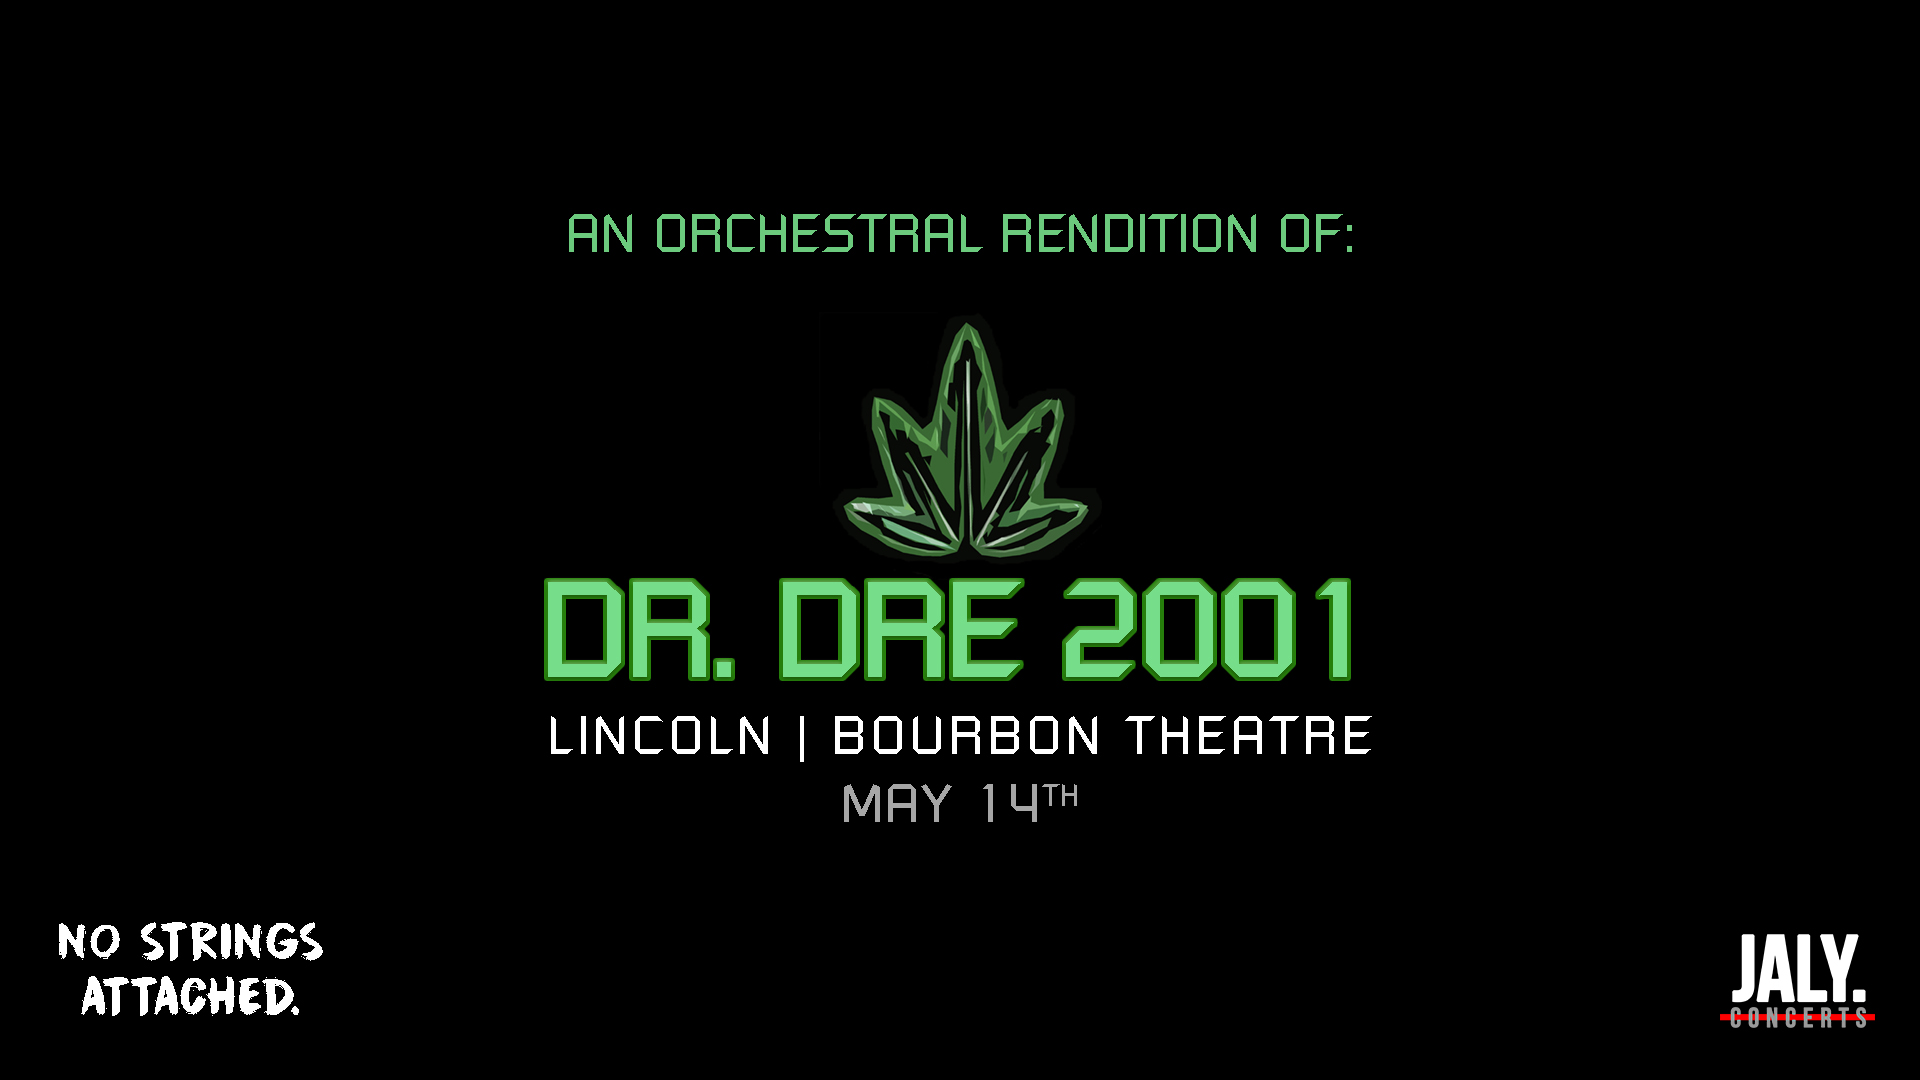 <h1 class="tribe-events-single-event-title">An Orchestral Rendition of Dr. Dre’s 2001</h1>